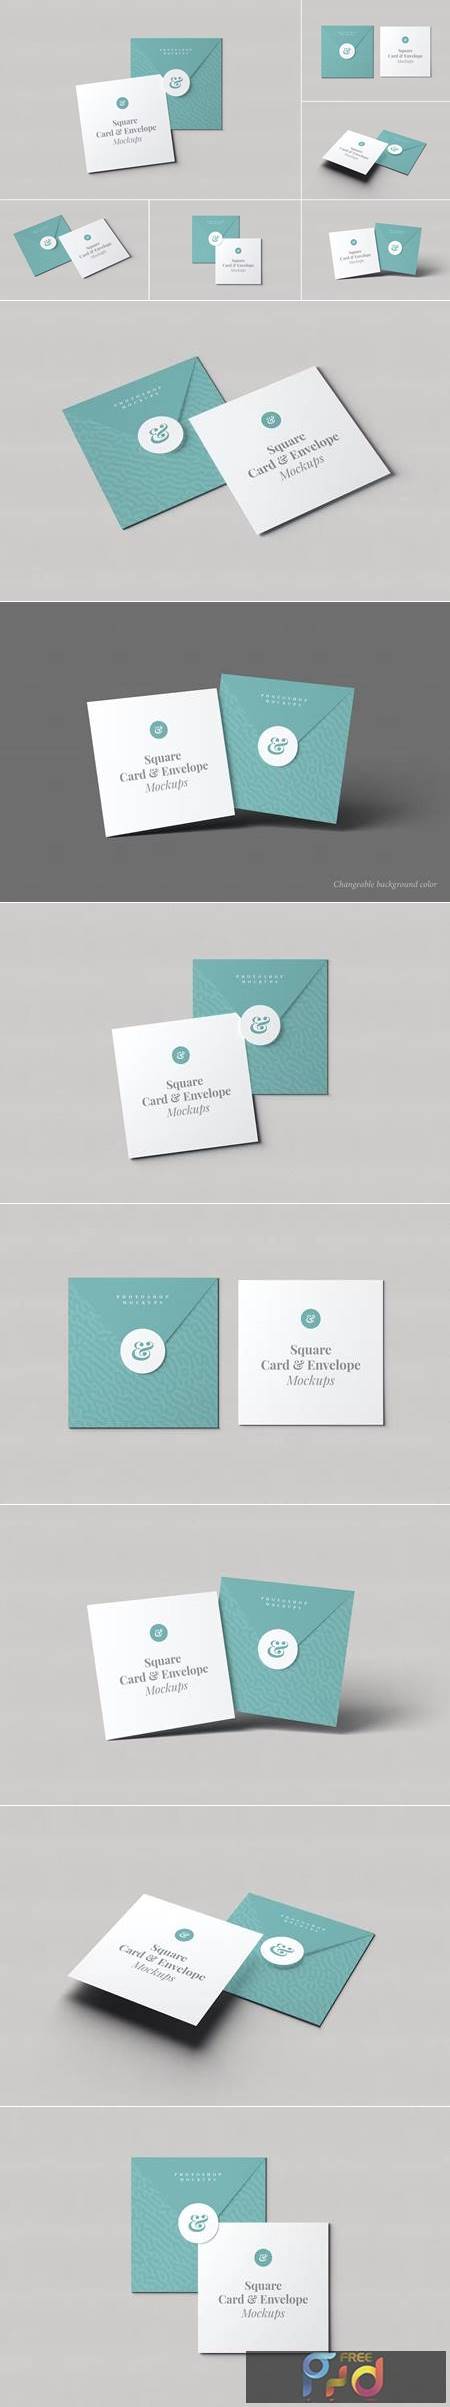 Square Card and Envelope Mockups QCLZ5YL 1